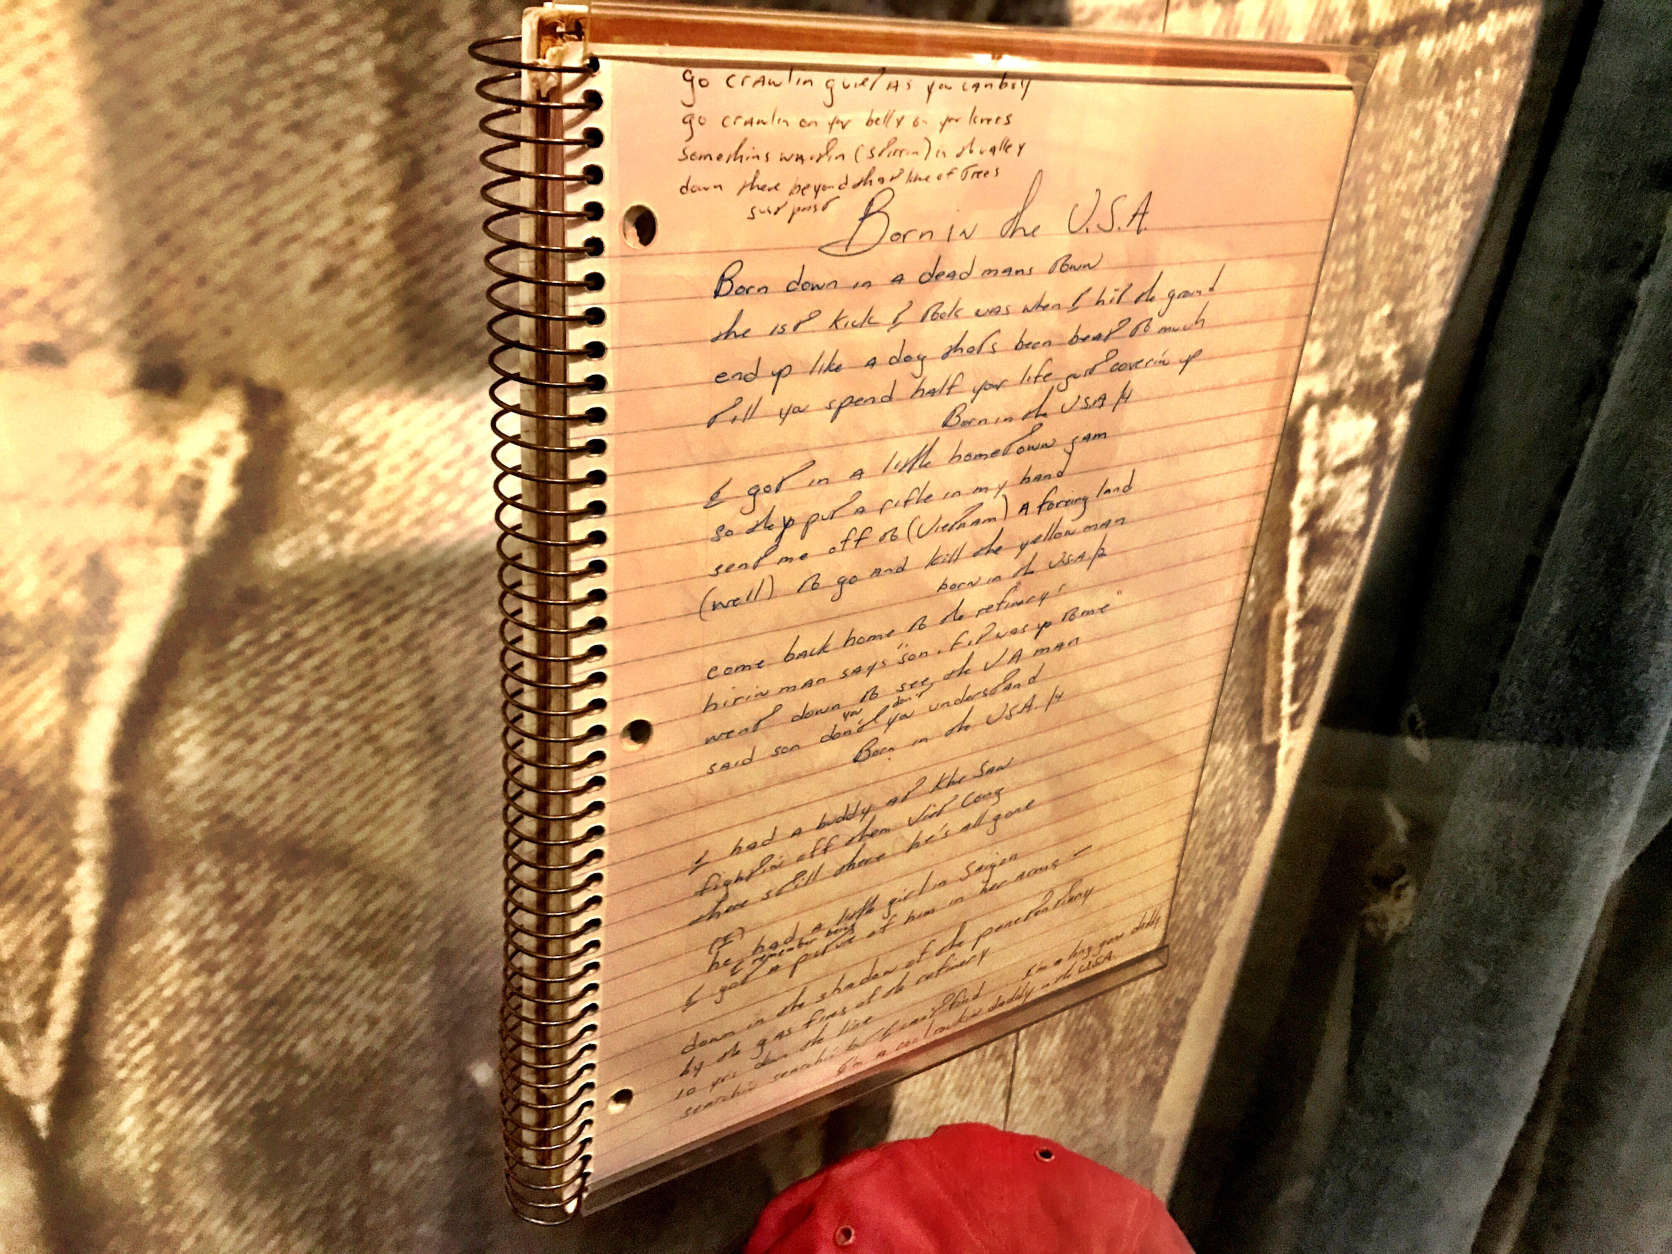 Bruce Springsteen's notebook, including "Born in the USA." The lyrics reflect the challenges of veterans returning from war. (WTOP/Neal Augenstein)